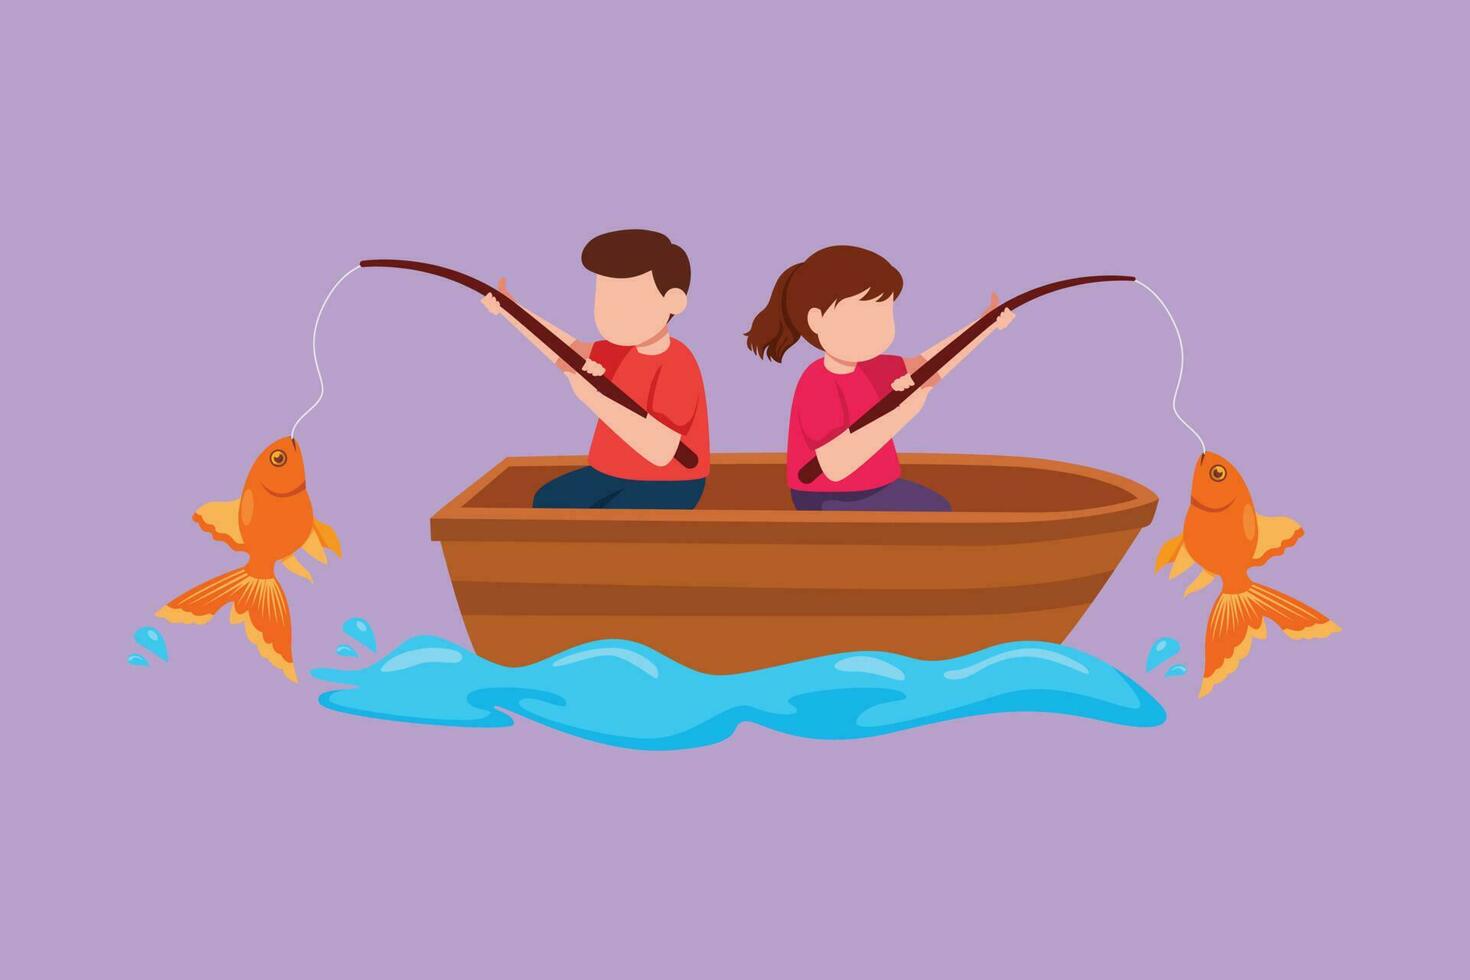 Cartoon flat style drawing smiling little boys and girls fishing together  on boat. Happy children fishing